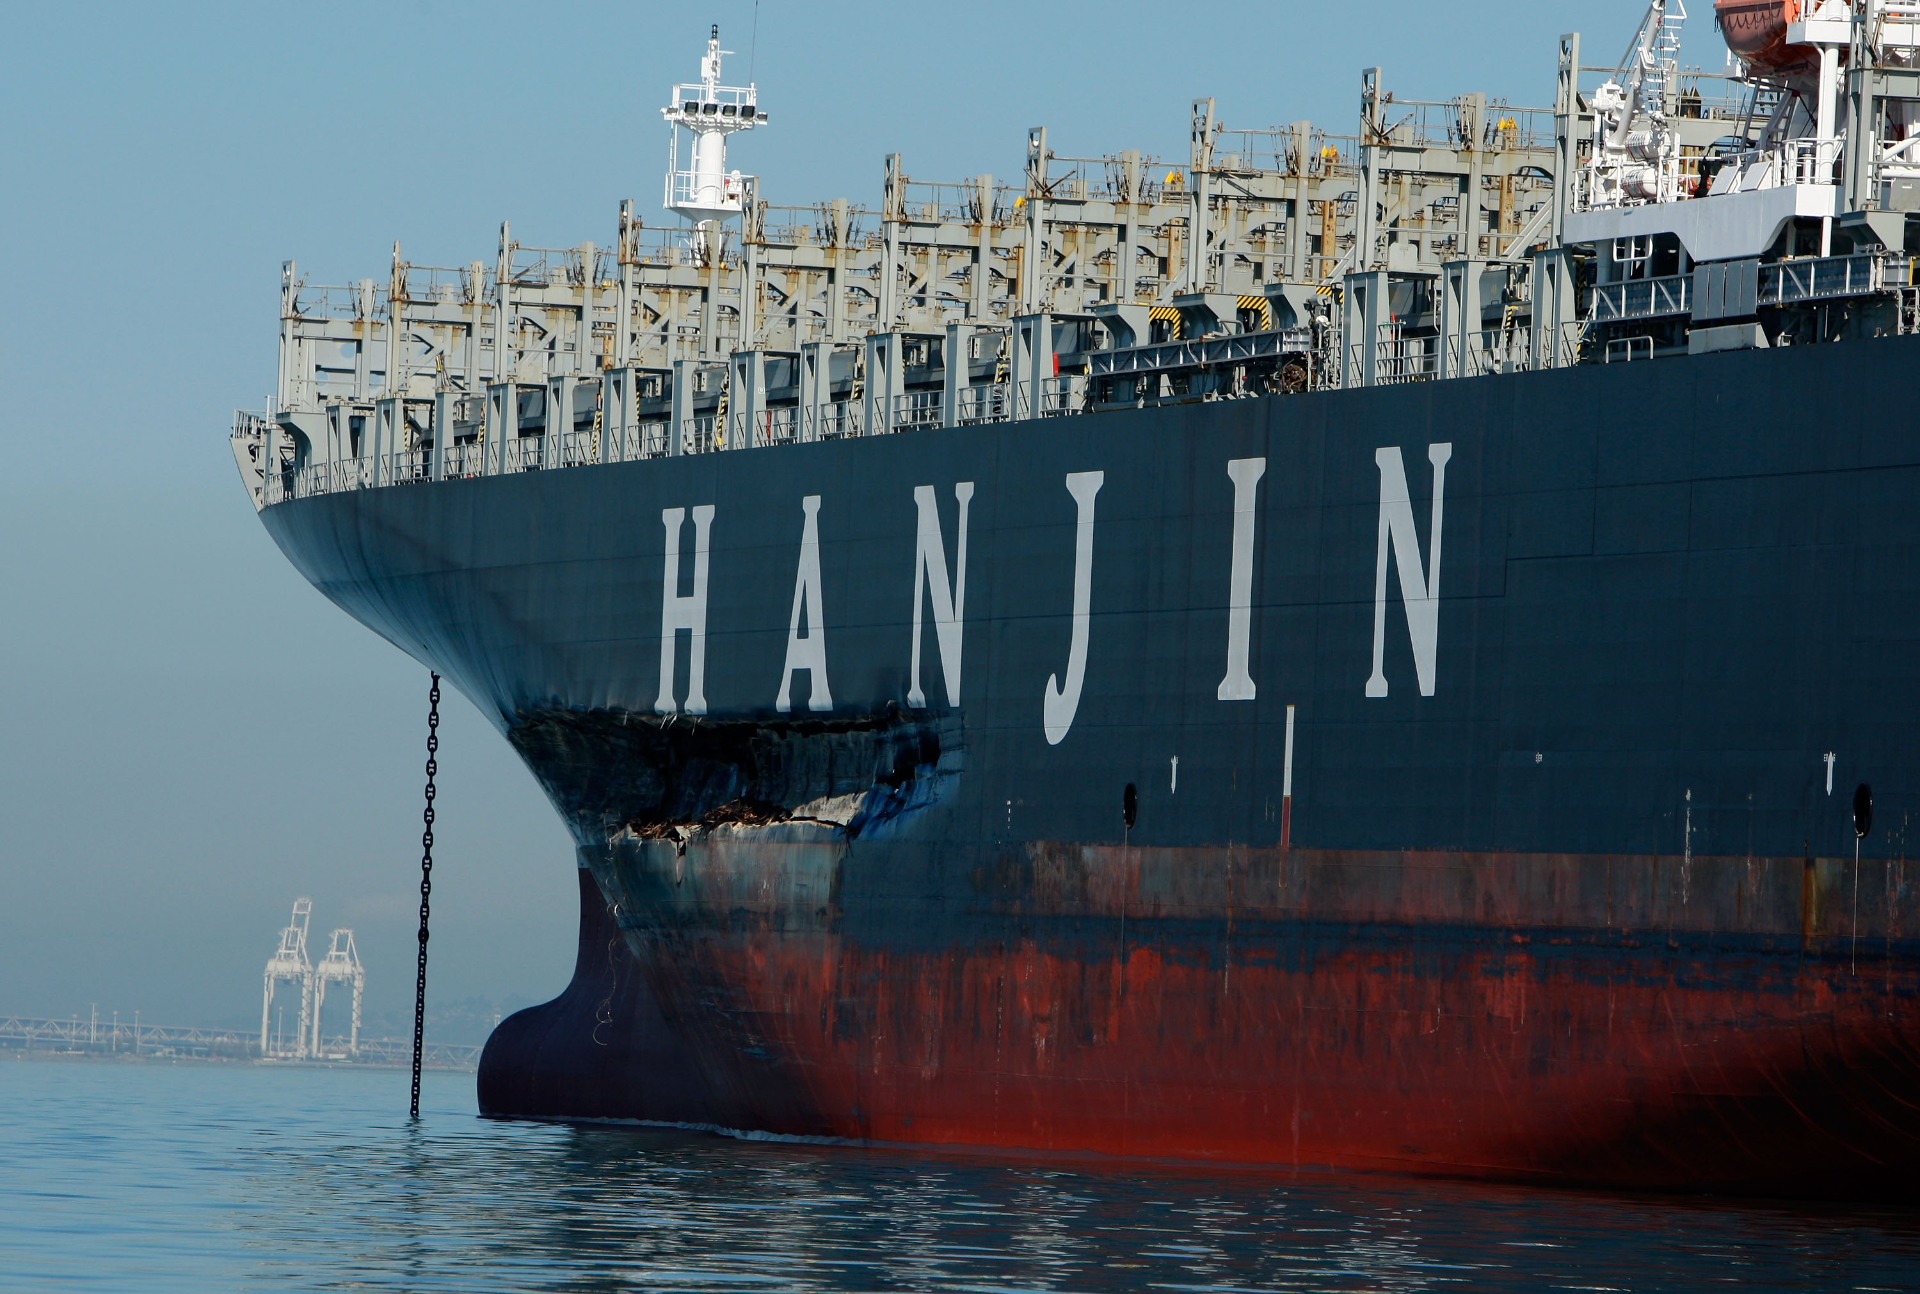 A large oil cargo ship sits in water with obvious damage to its hull.